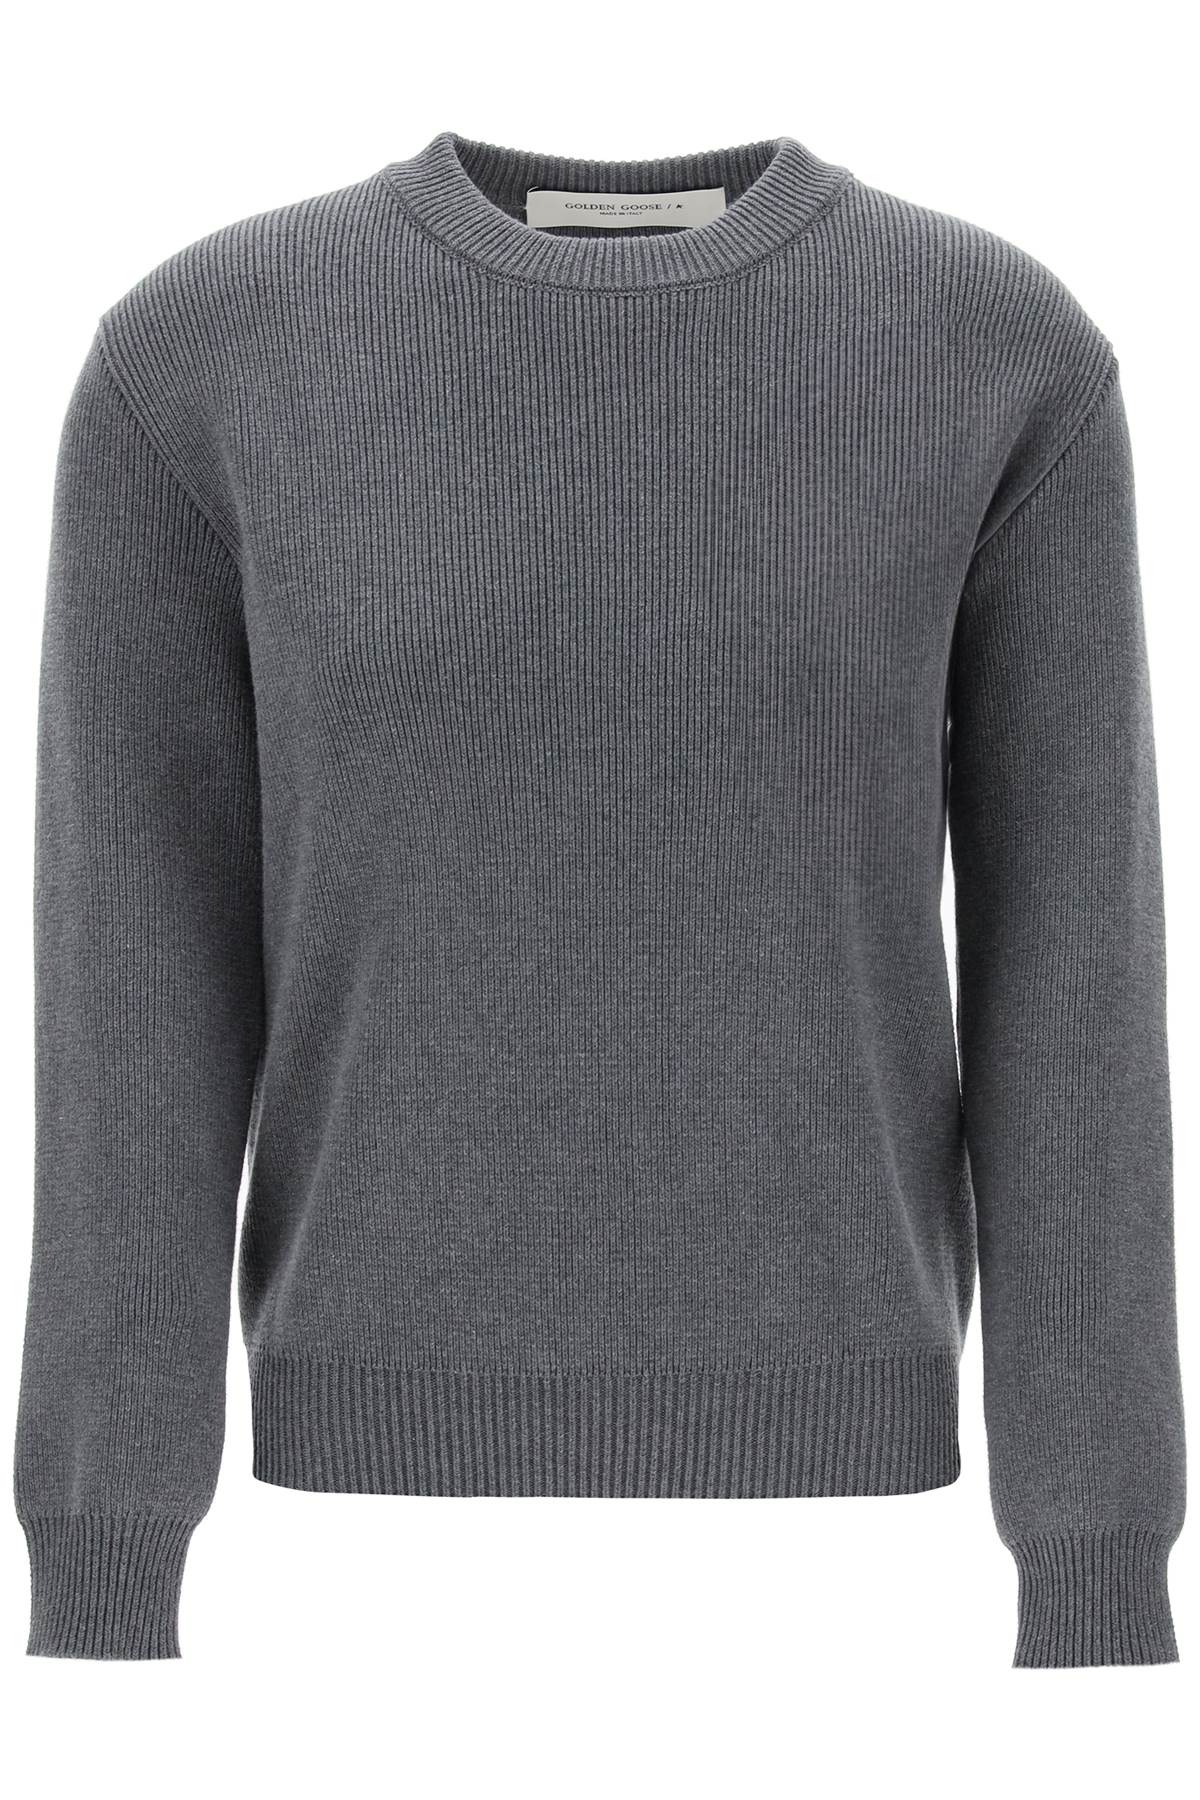 Dany Cotton Sweater